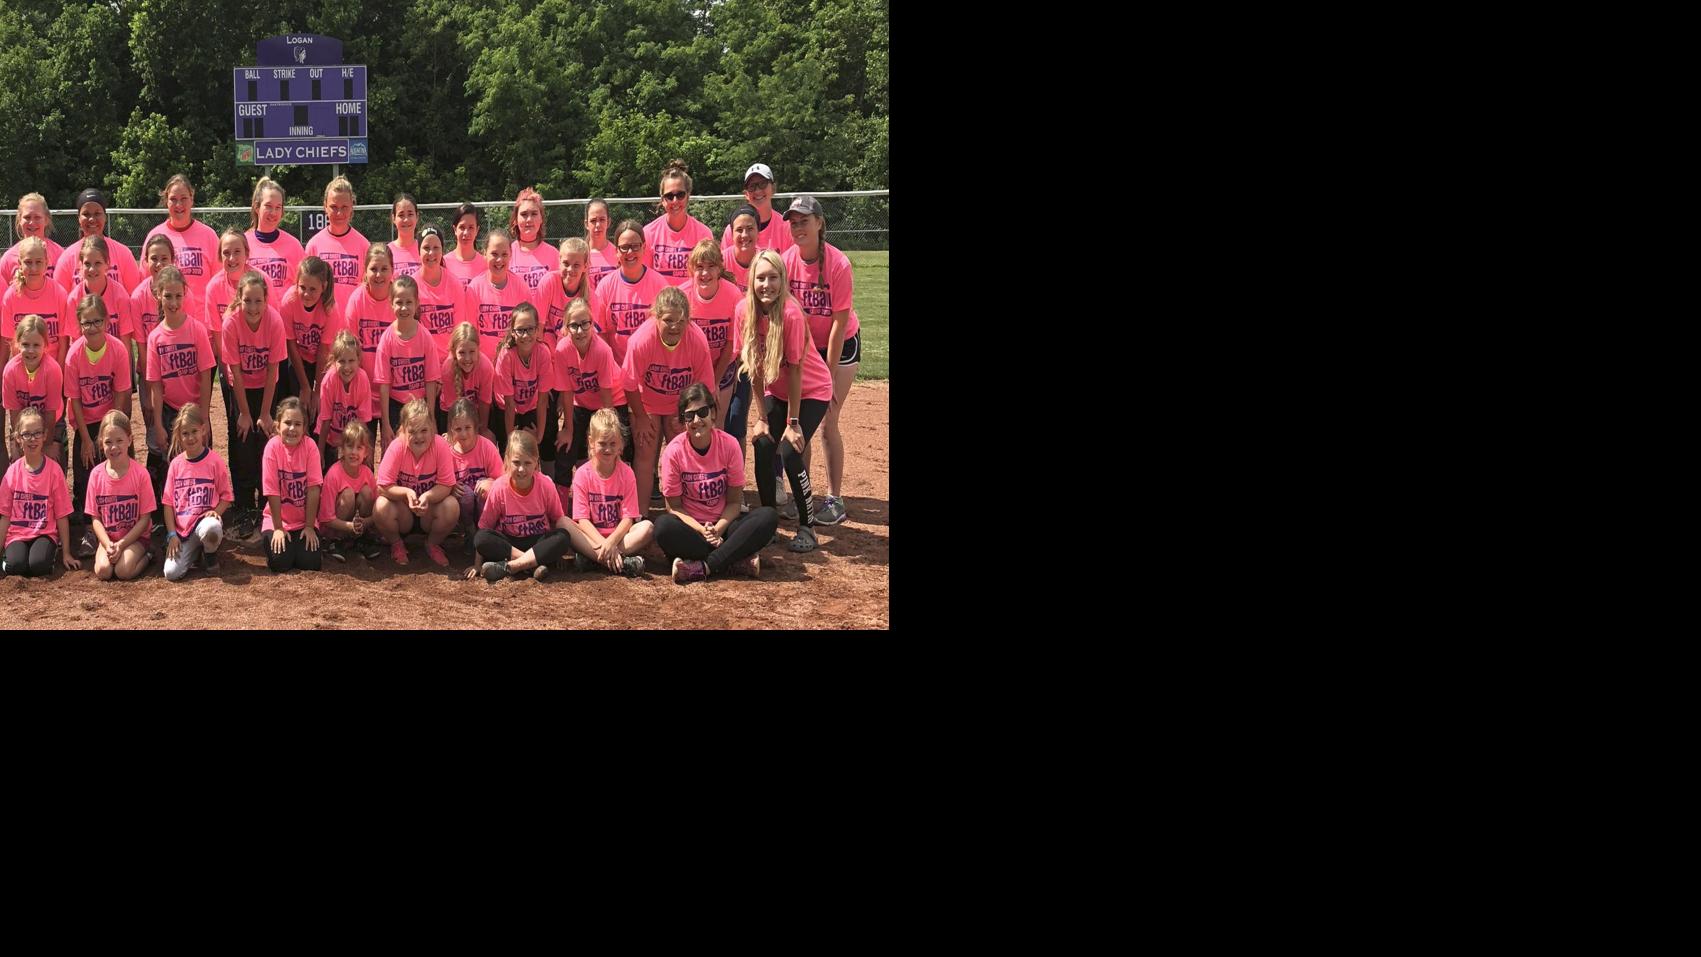 Another successful girls softball camp Sports